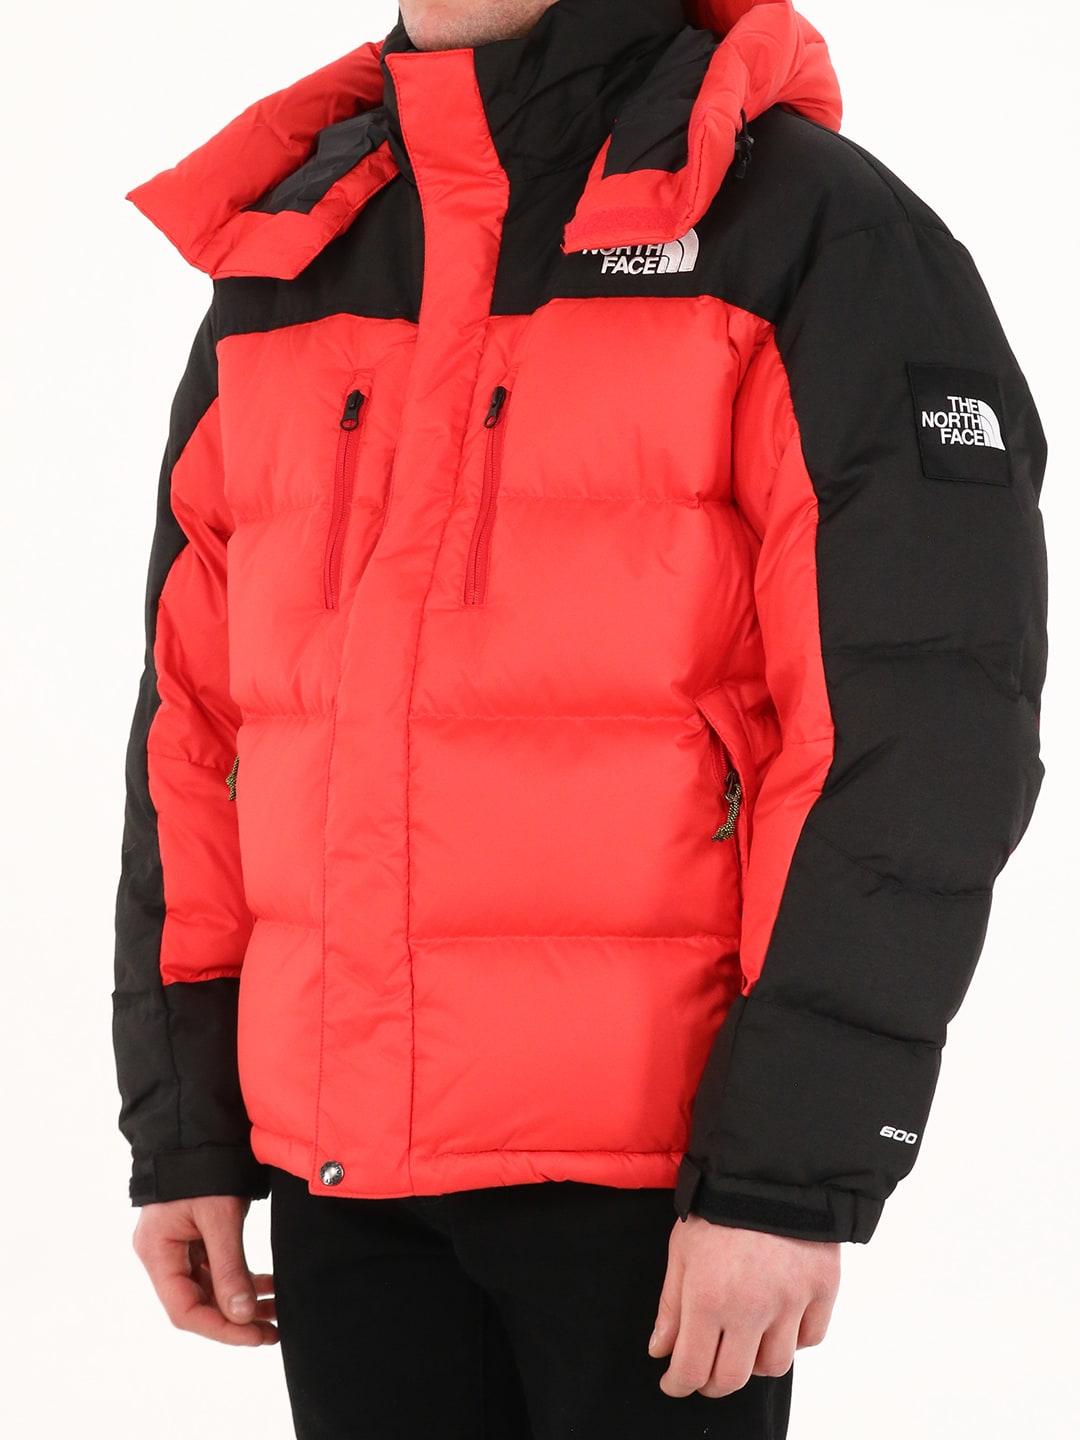 The North Face Men's Red Search & Rescue Himalayan Parka